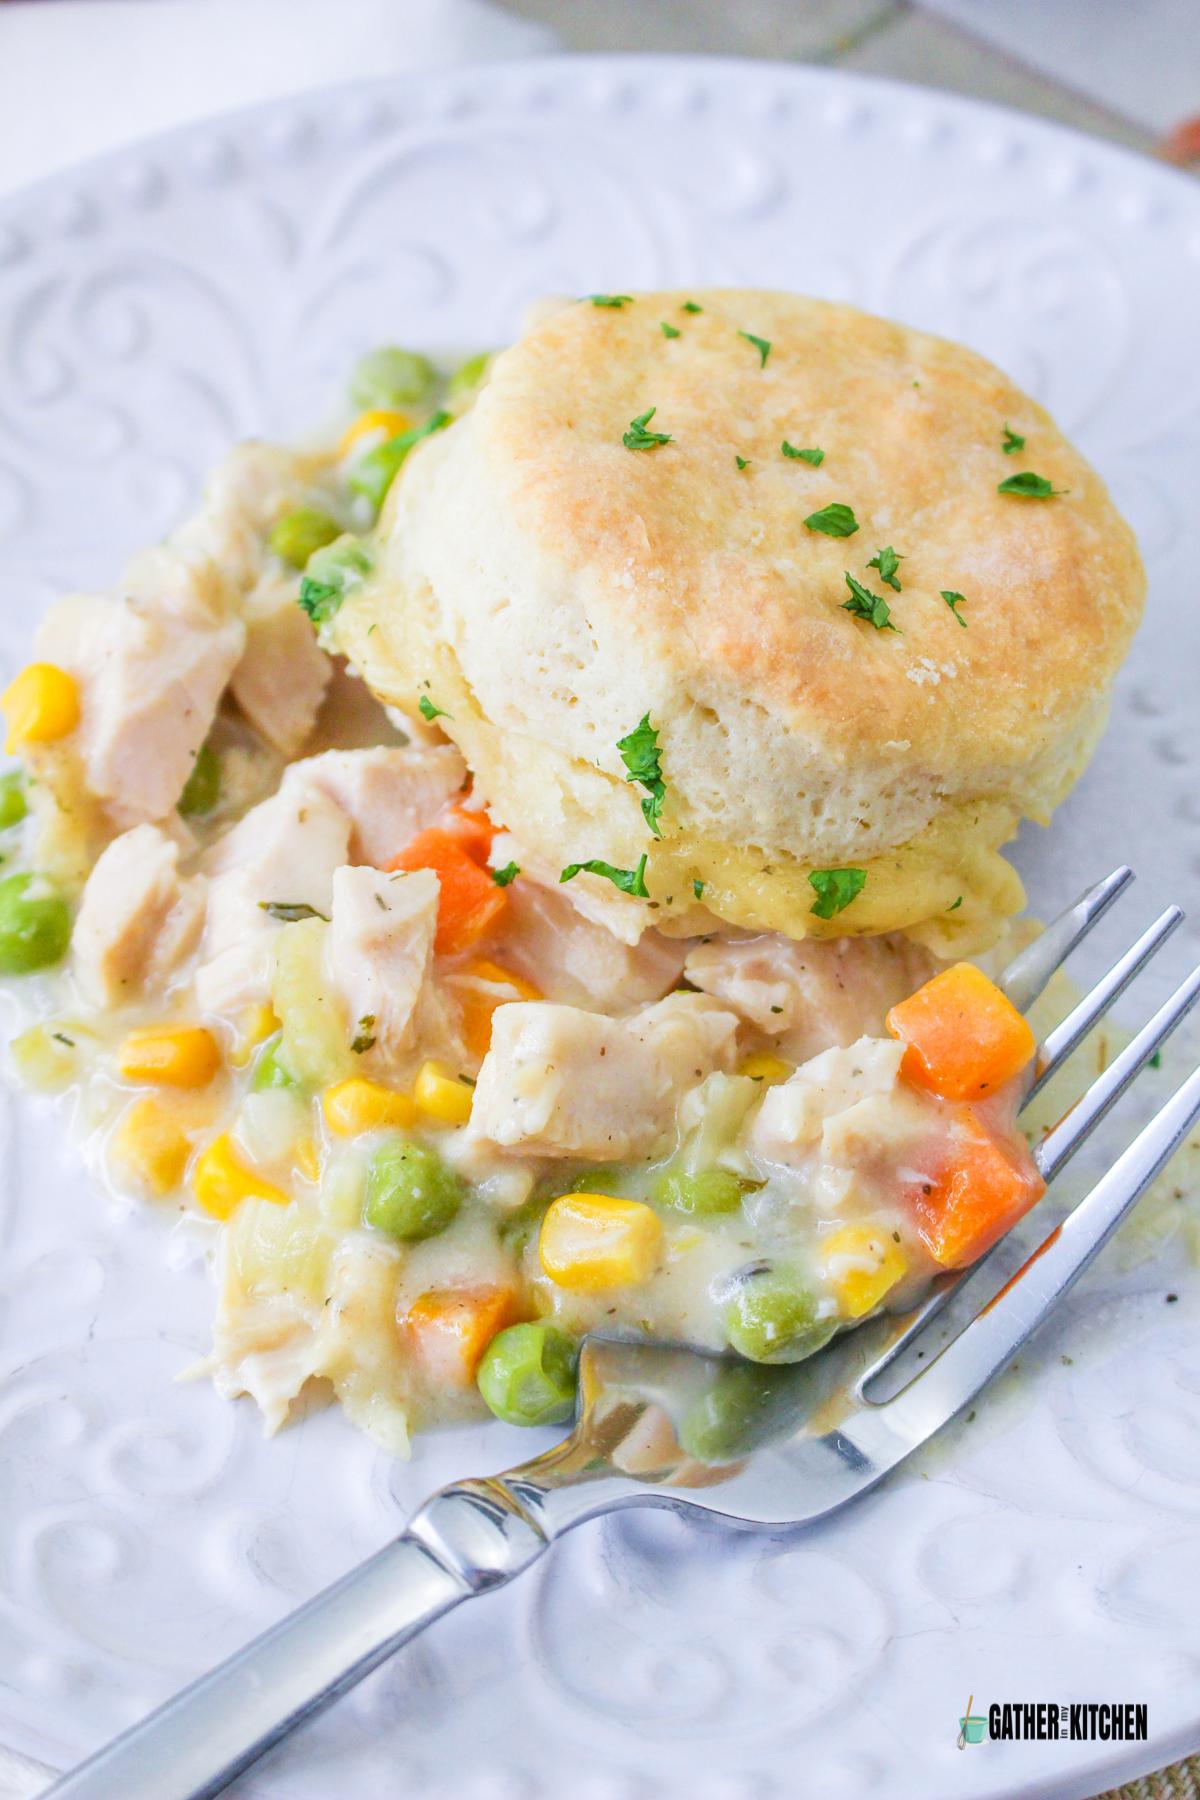 Turkey Pot Pie with biscuits on a plate.